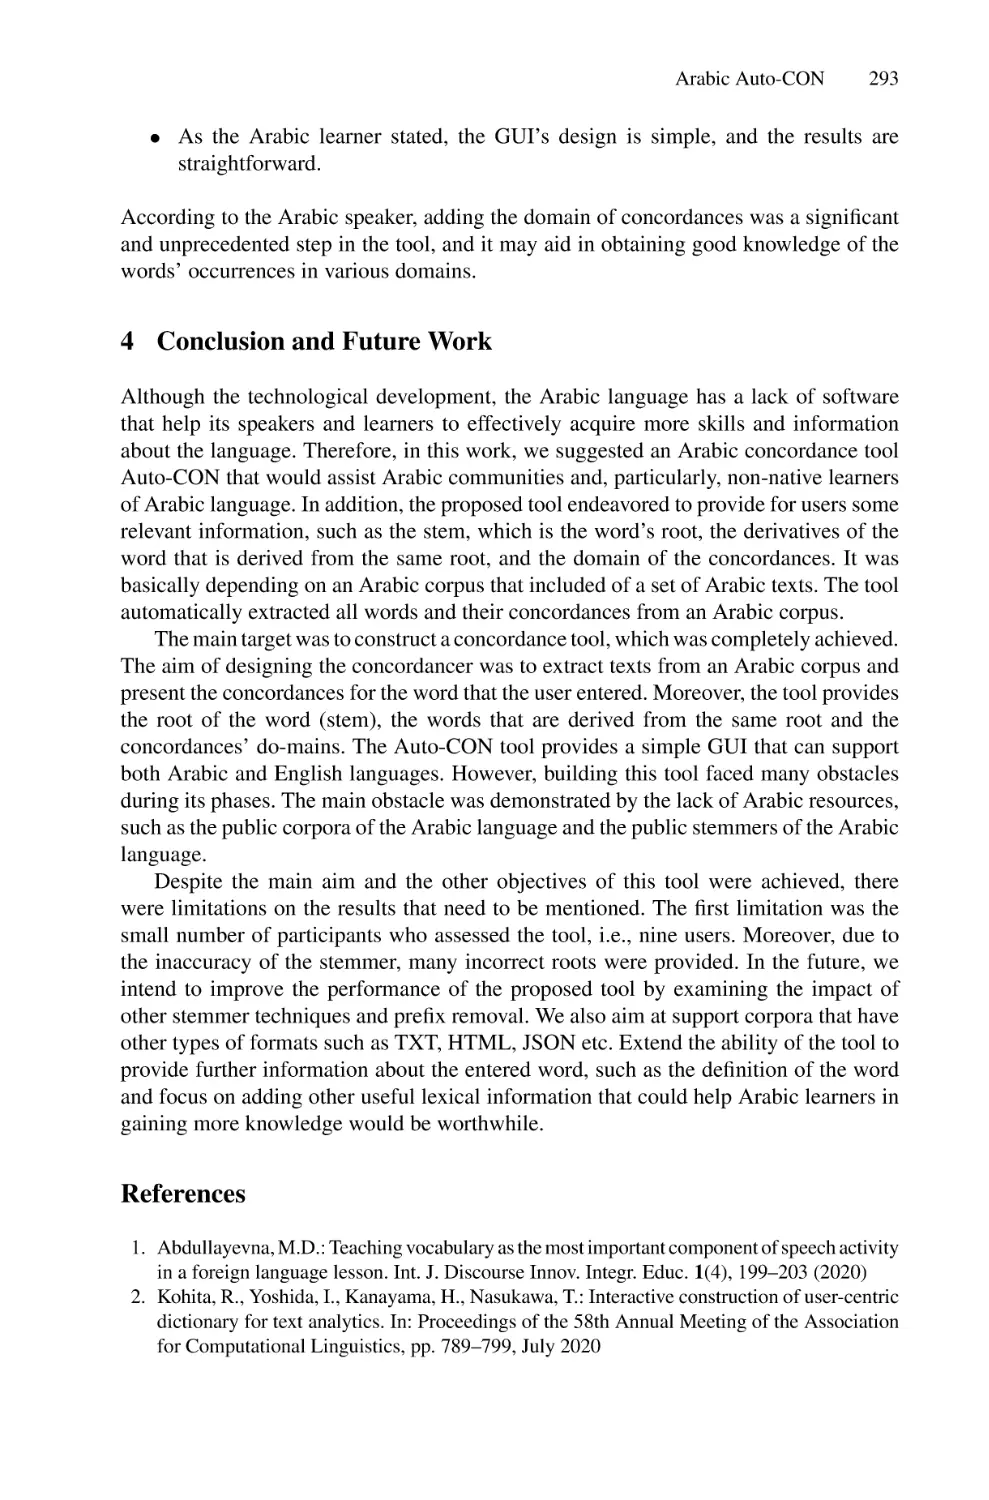 4 Conclusion and Future Work
References